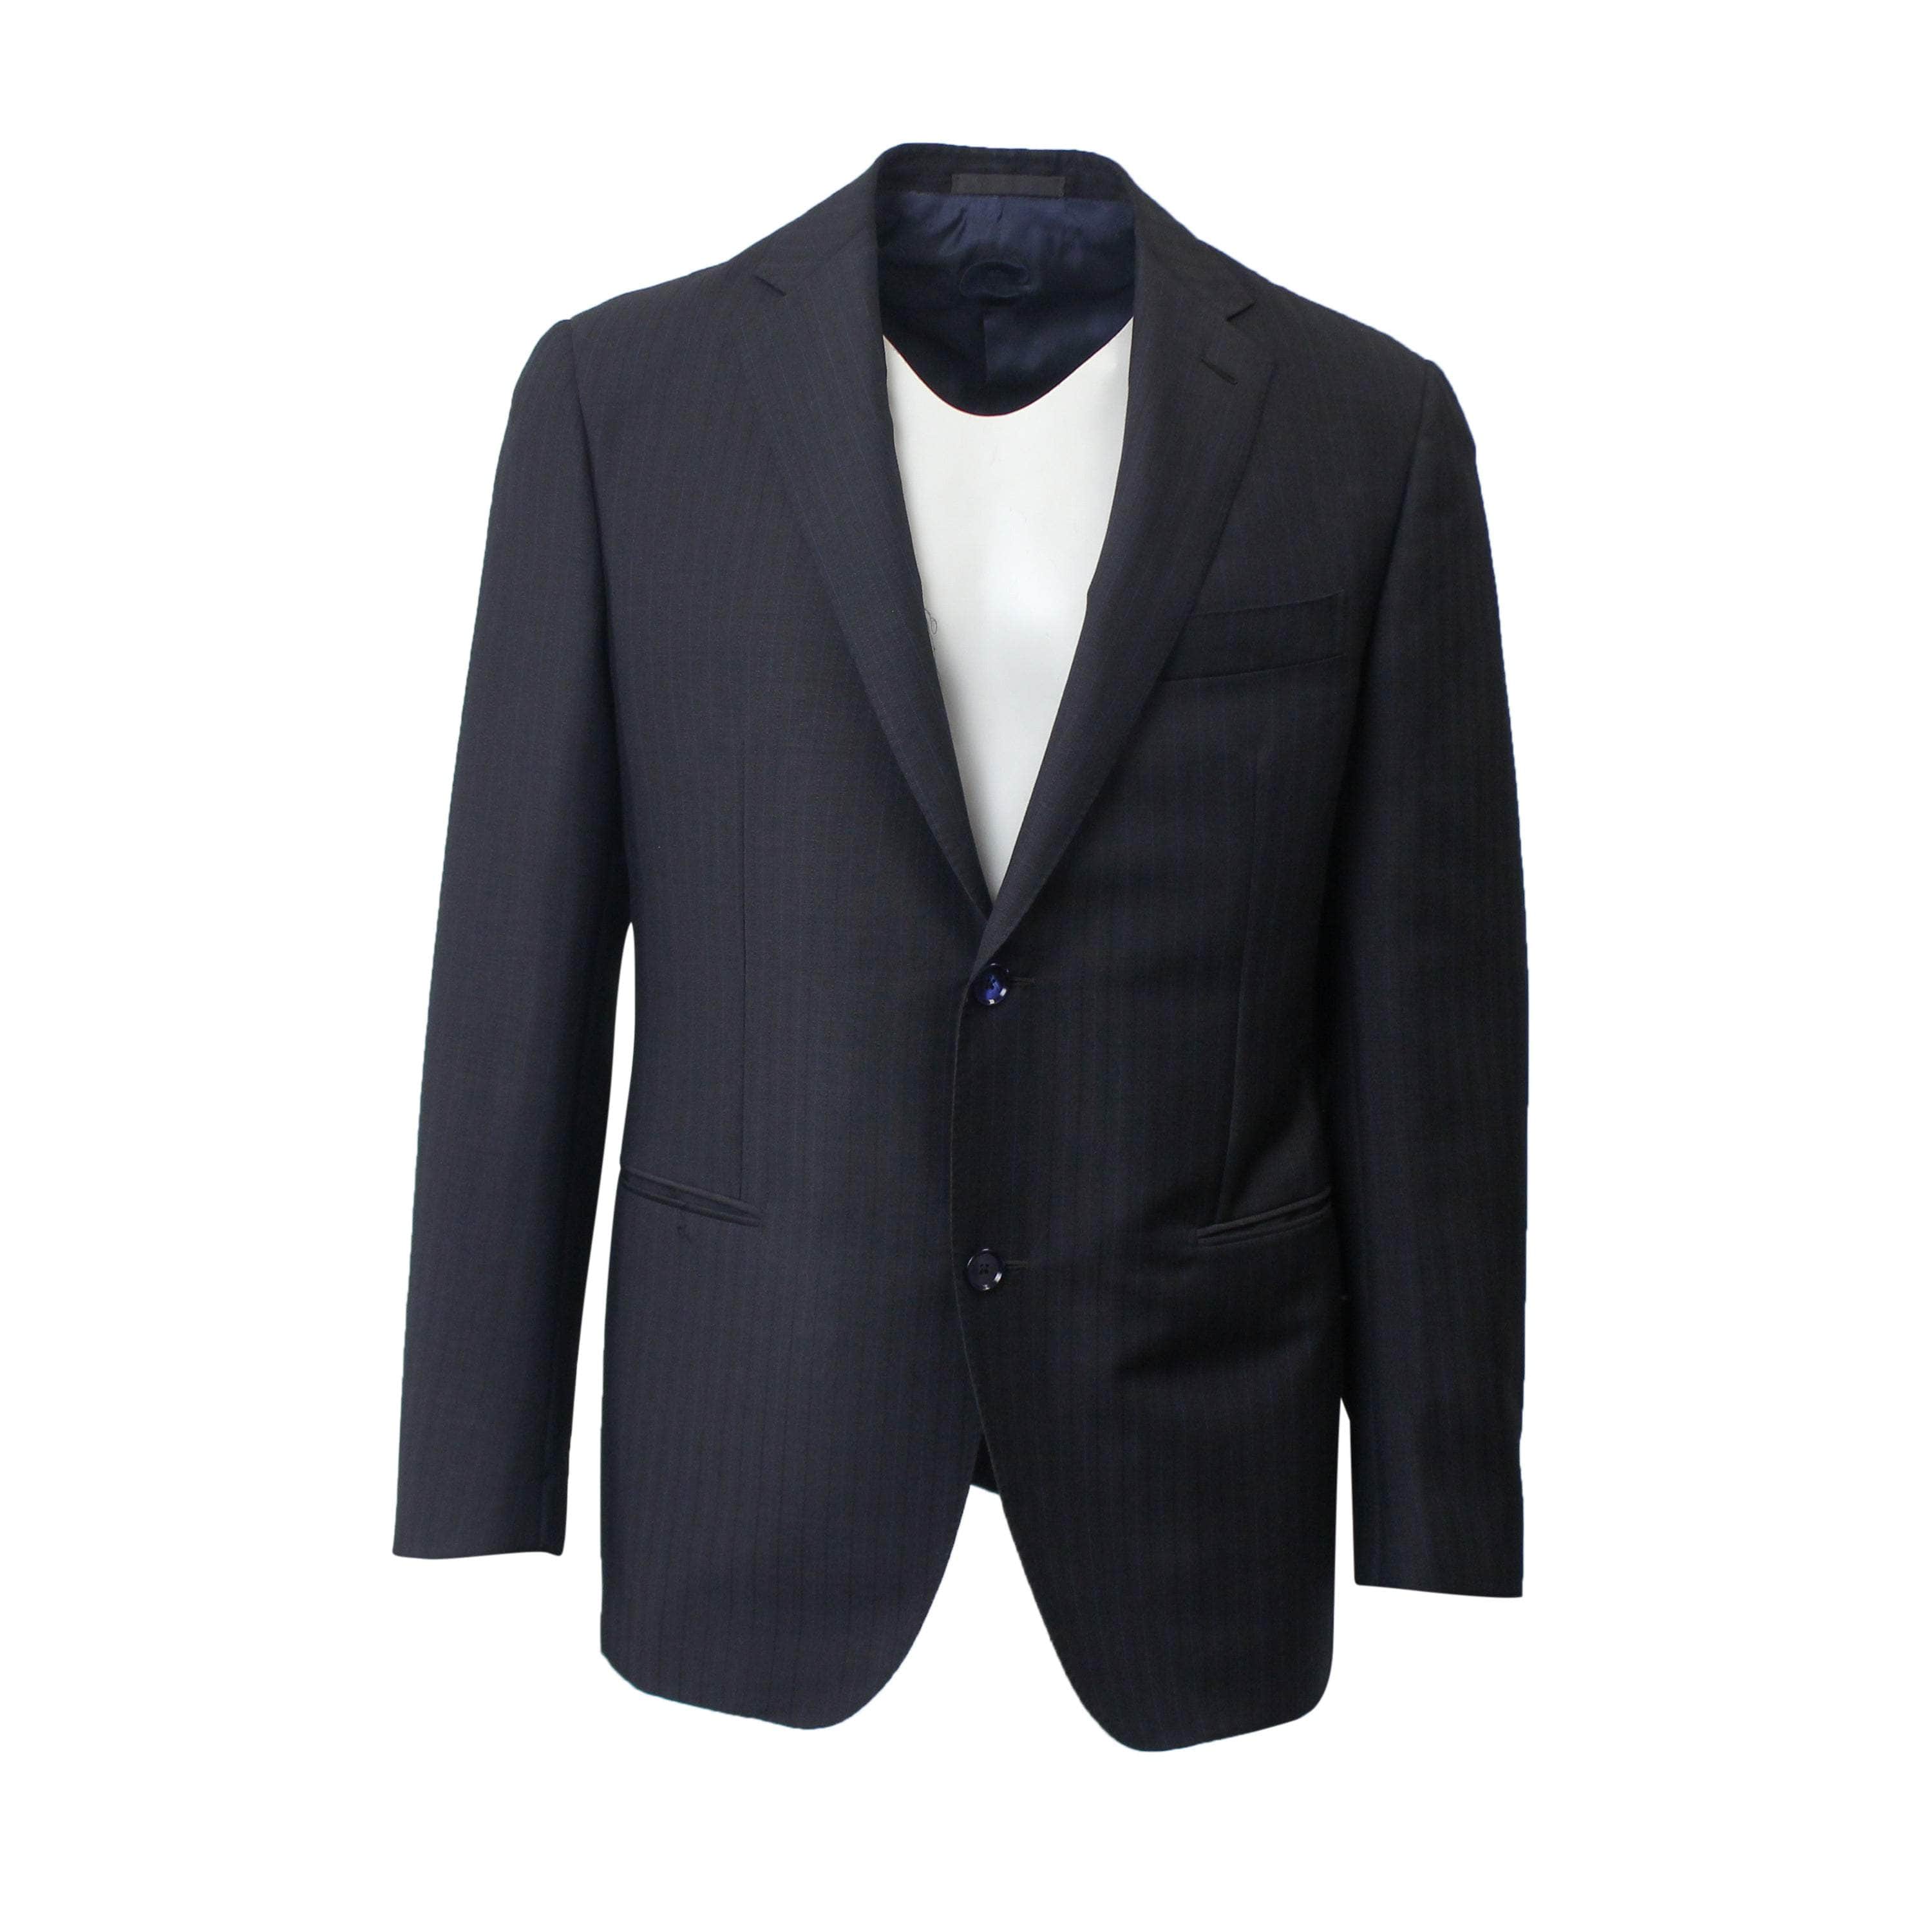 Caruso 500-750, caruso, channelenable-all, chicmi, couponcollection, main-clothing, shop375, size-50, Stadium Goods, stadiumgoods 50 Black/Light Single Breasted Striped Mohair And Wool Suit 8R CRS-XTPS-0174/50 CRS-XTPS-0174/50